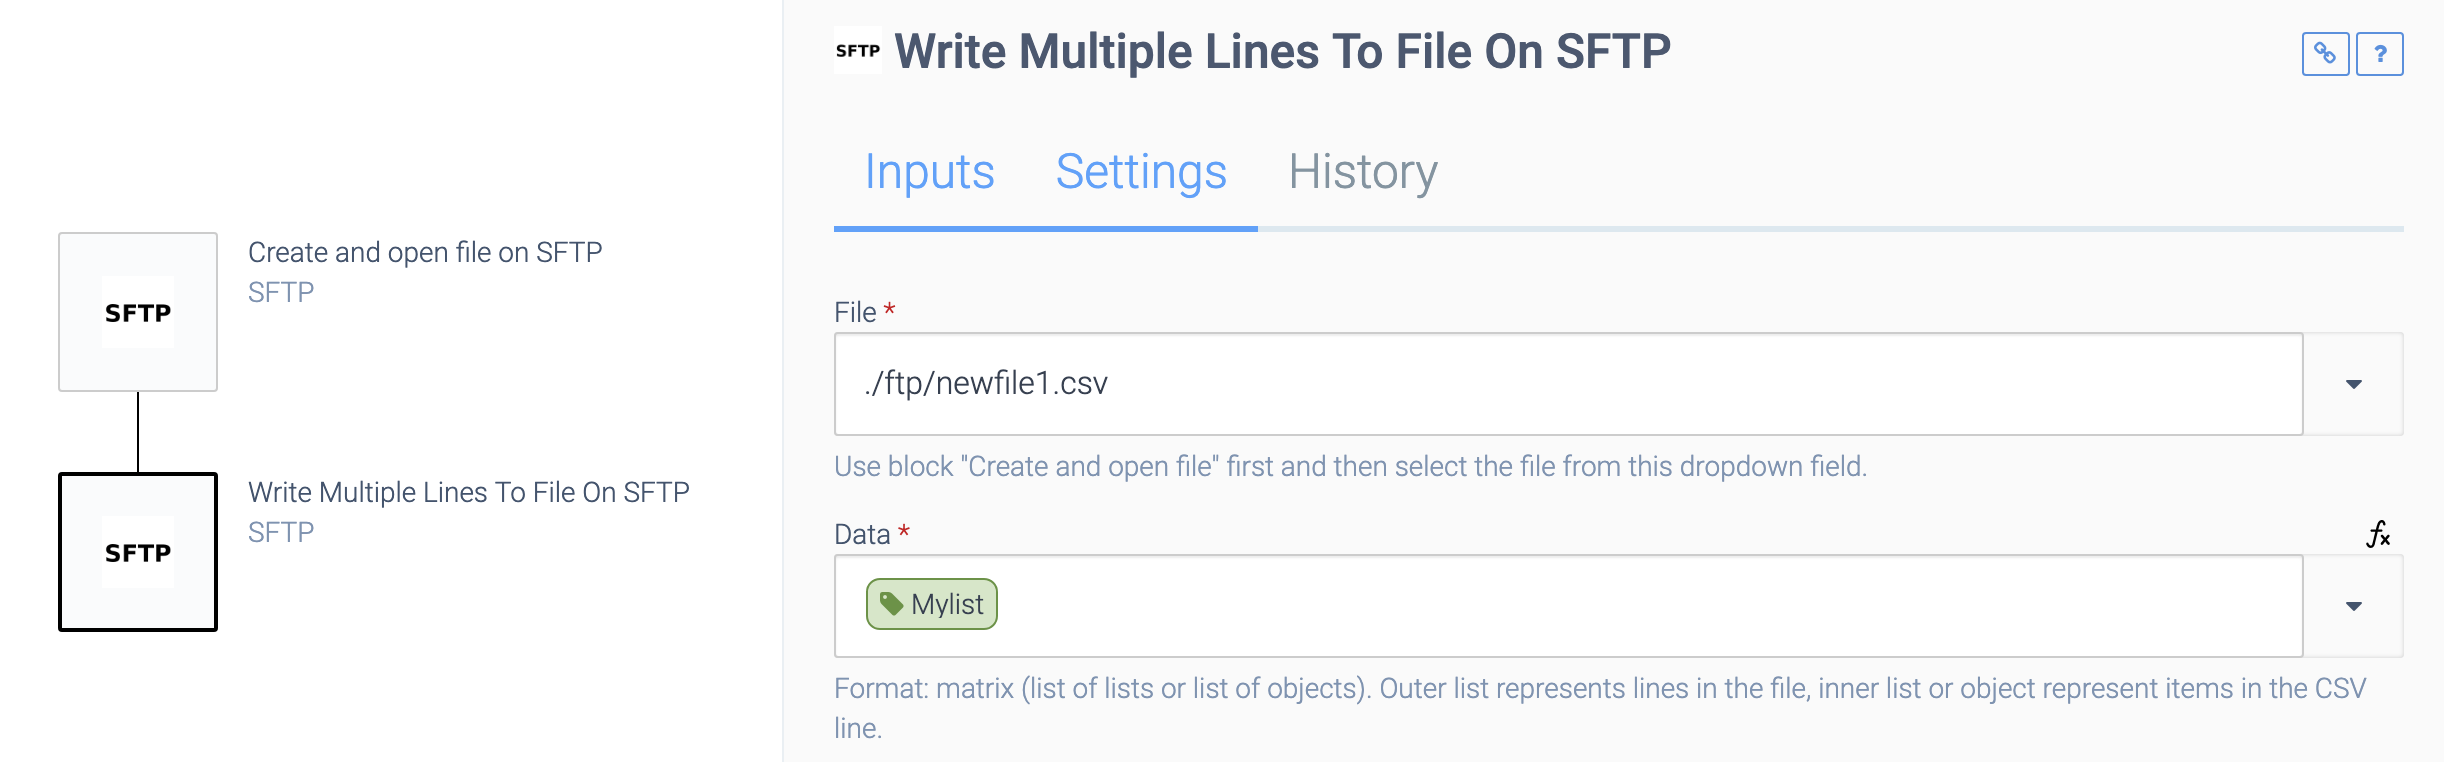 As above, but with a Write Multiple Lines To File On SFTP block. It connects to the newly created csv file and adds a list to it.